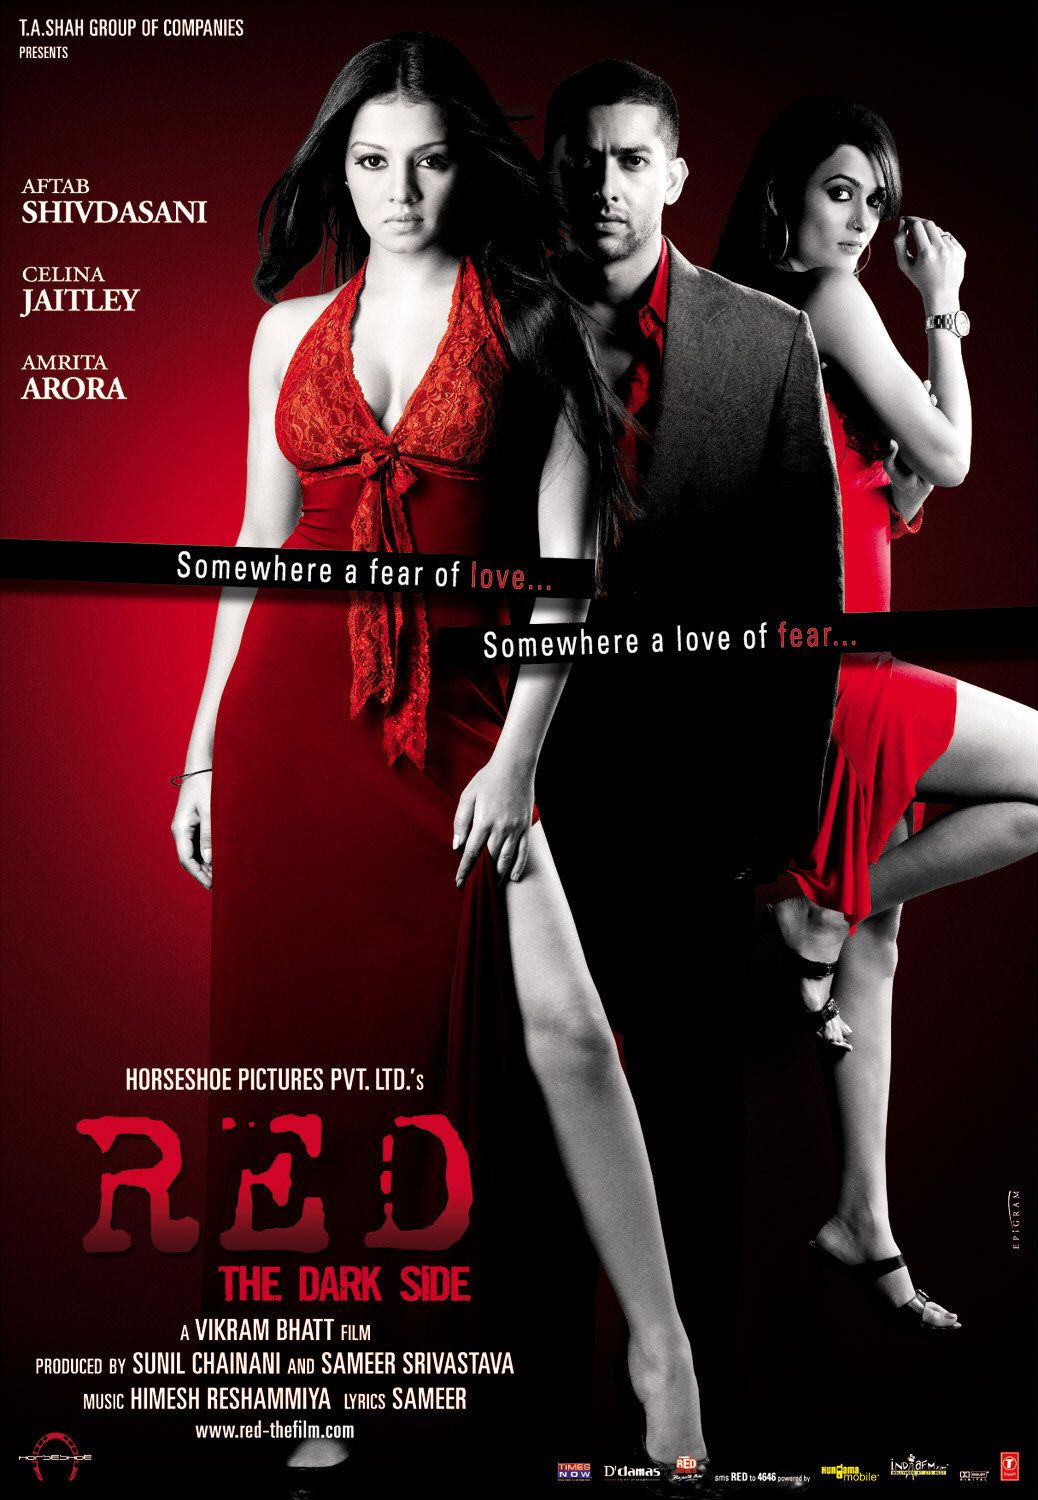 red dress movie poster